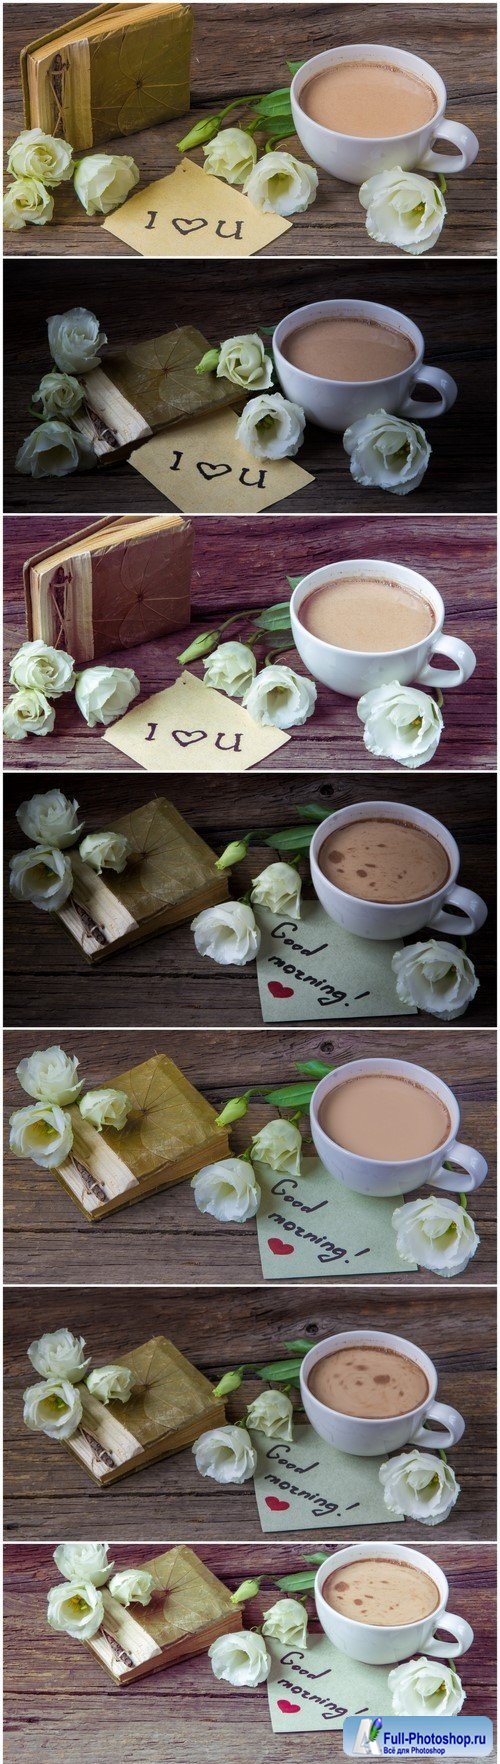 Coffee cup flower lisianthus and notes good morning on wooden background 7X JPEG